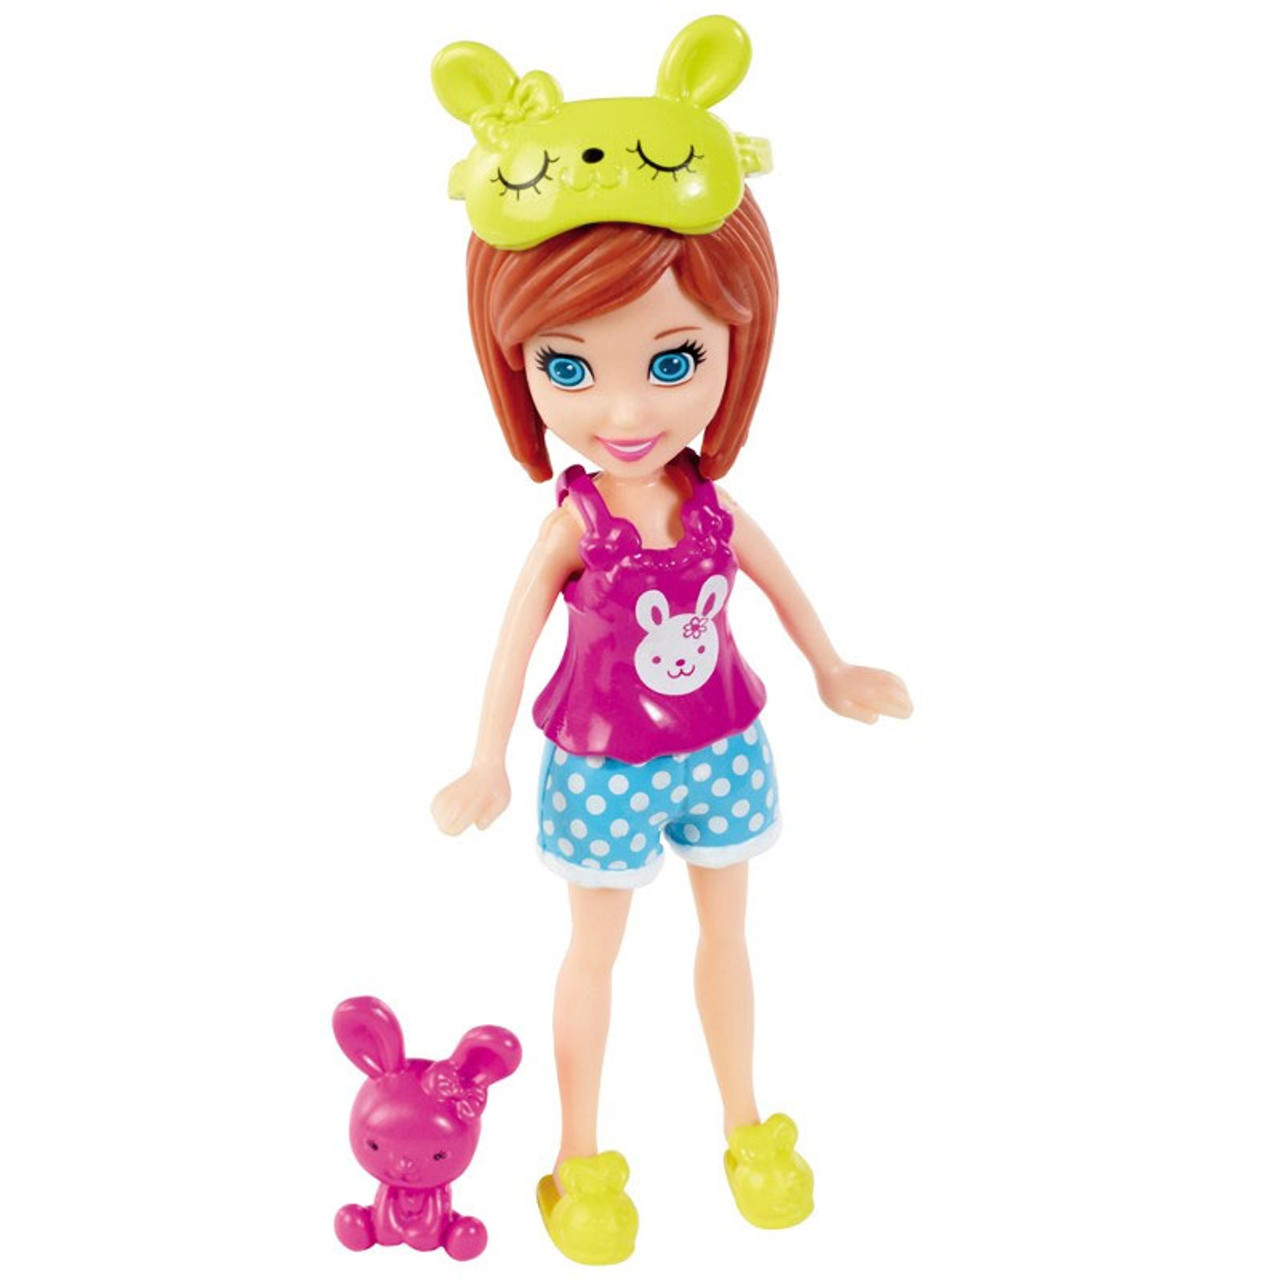 Polly Pocket Pet Boutique Lila Doll ドール 人形 フィギュア